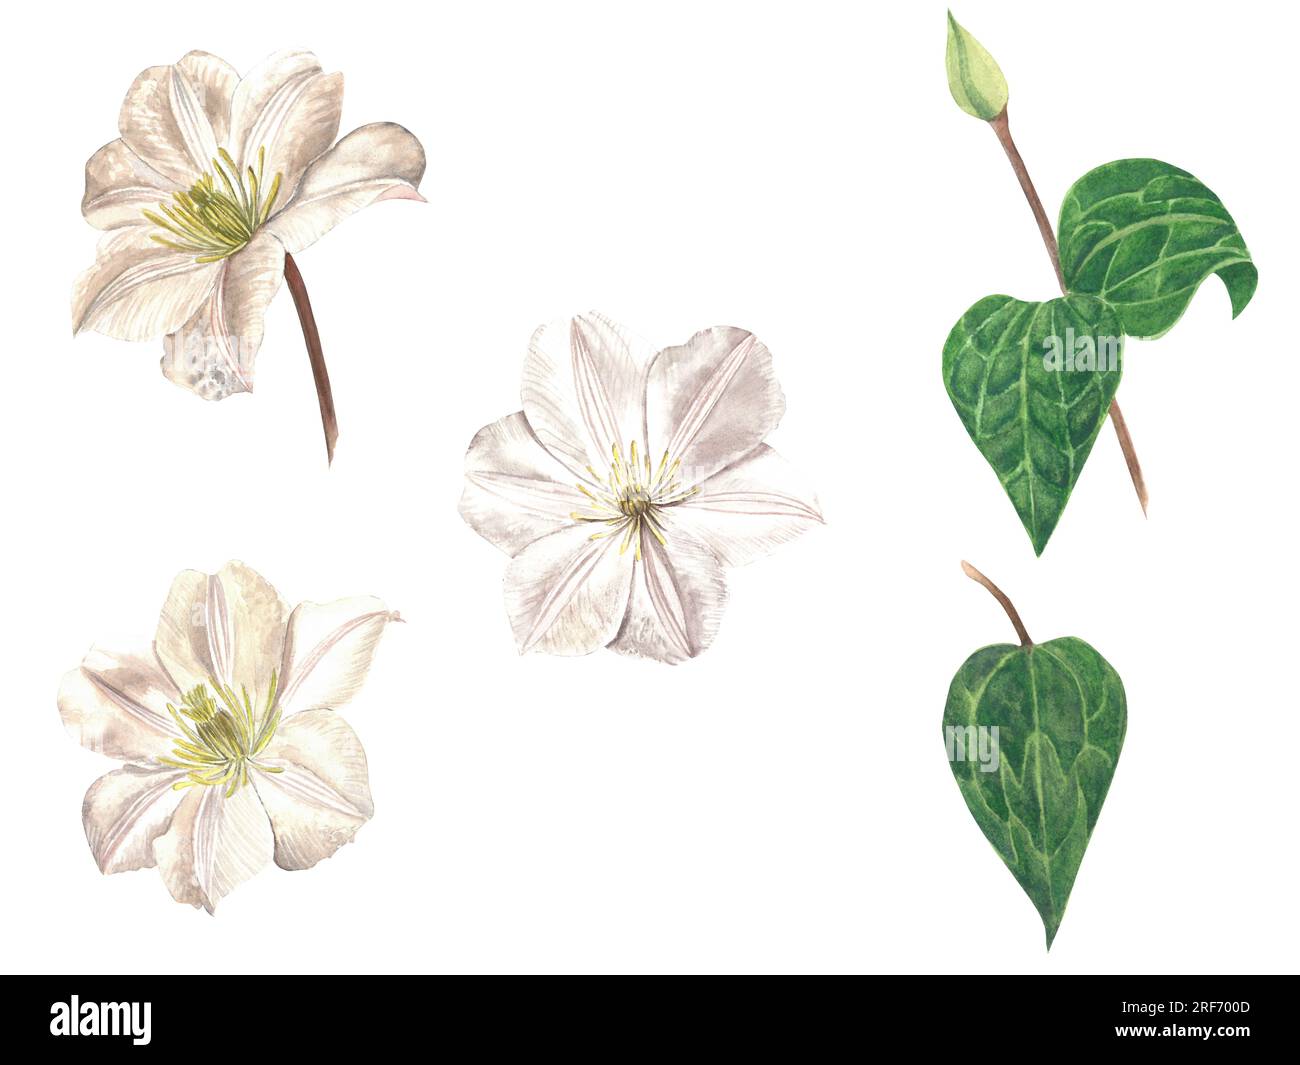 Watercolor illustration of clematis flowers. Set of flowers and leaves on a white background, made by hand Stock Photo